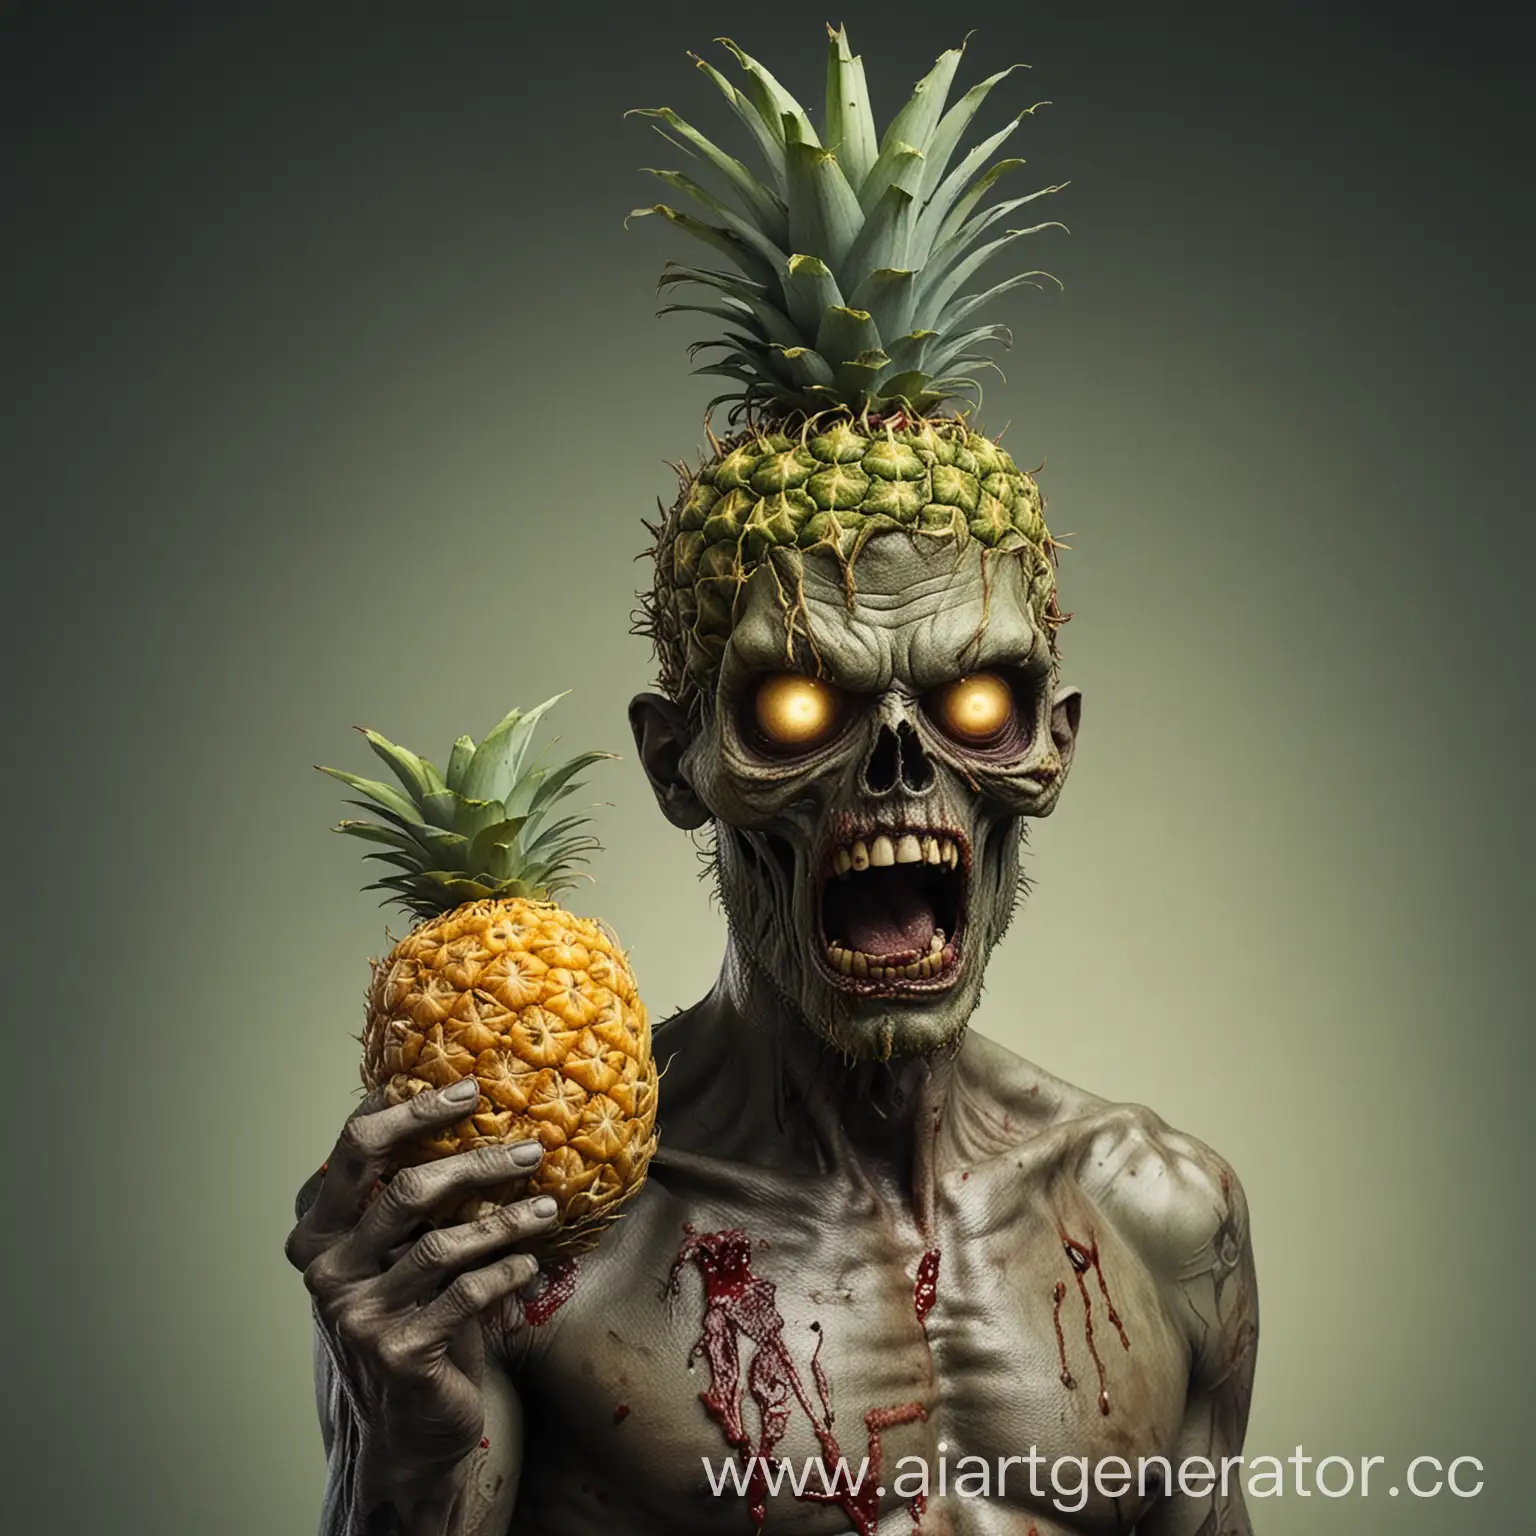 Zombie-with-Pineapple-Head-Spooky-Fruit-Creature-Stalking-Through-the-Misty-Night